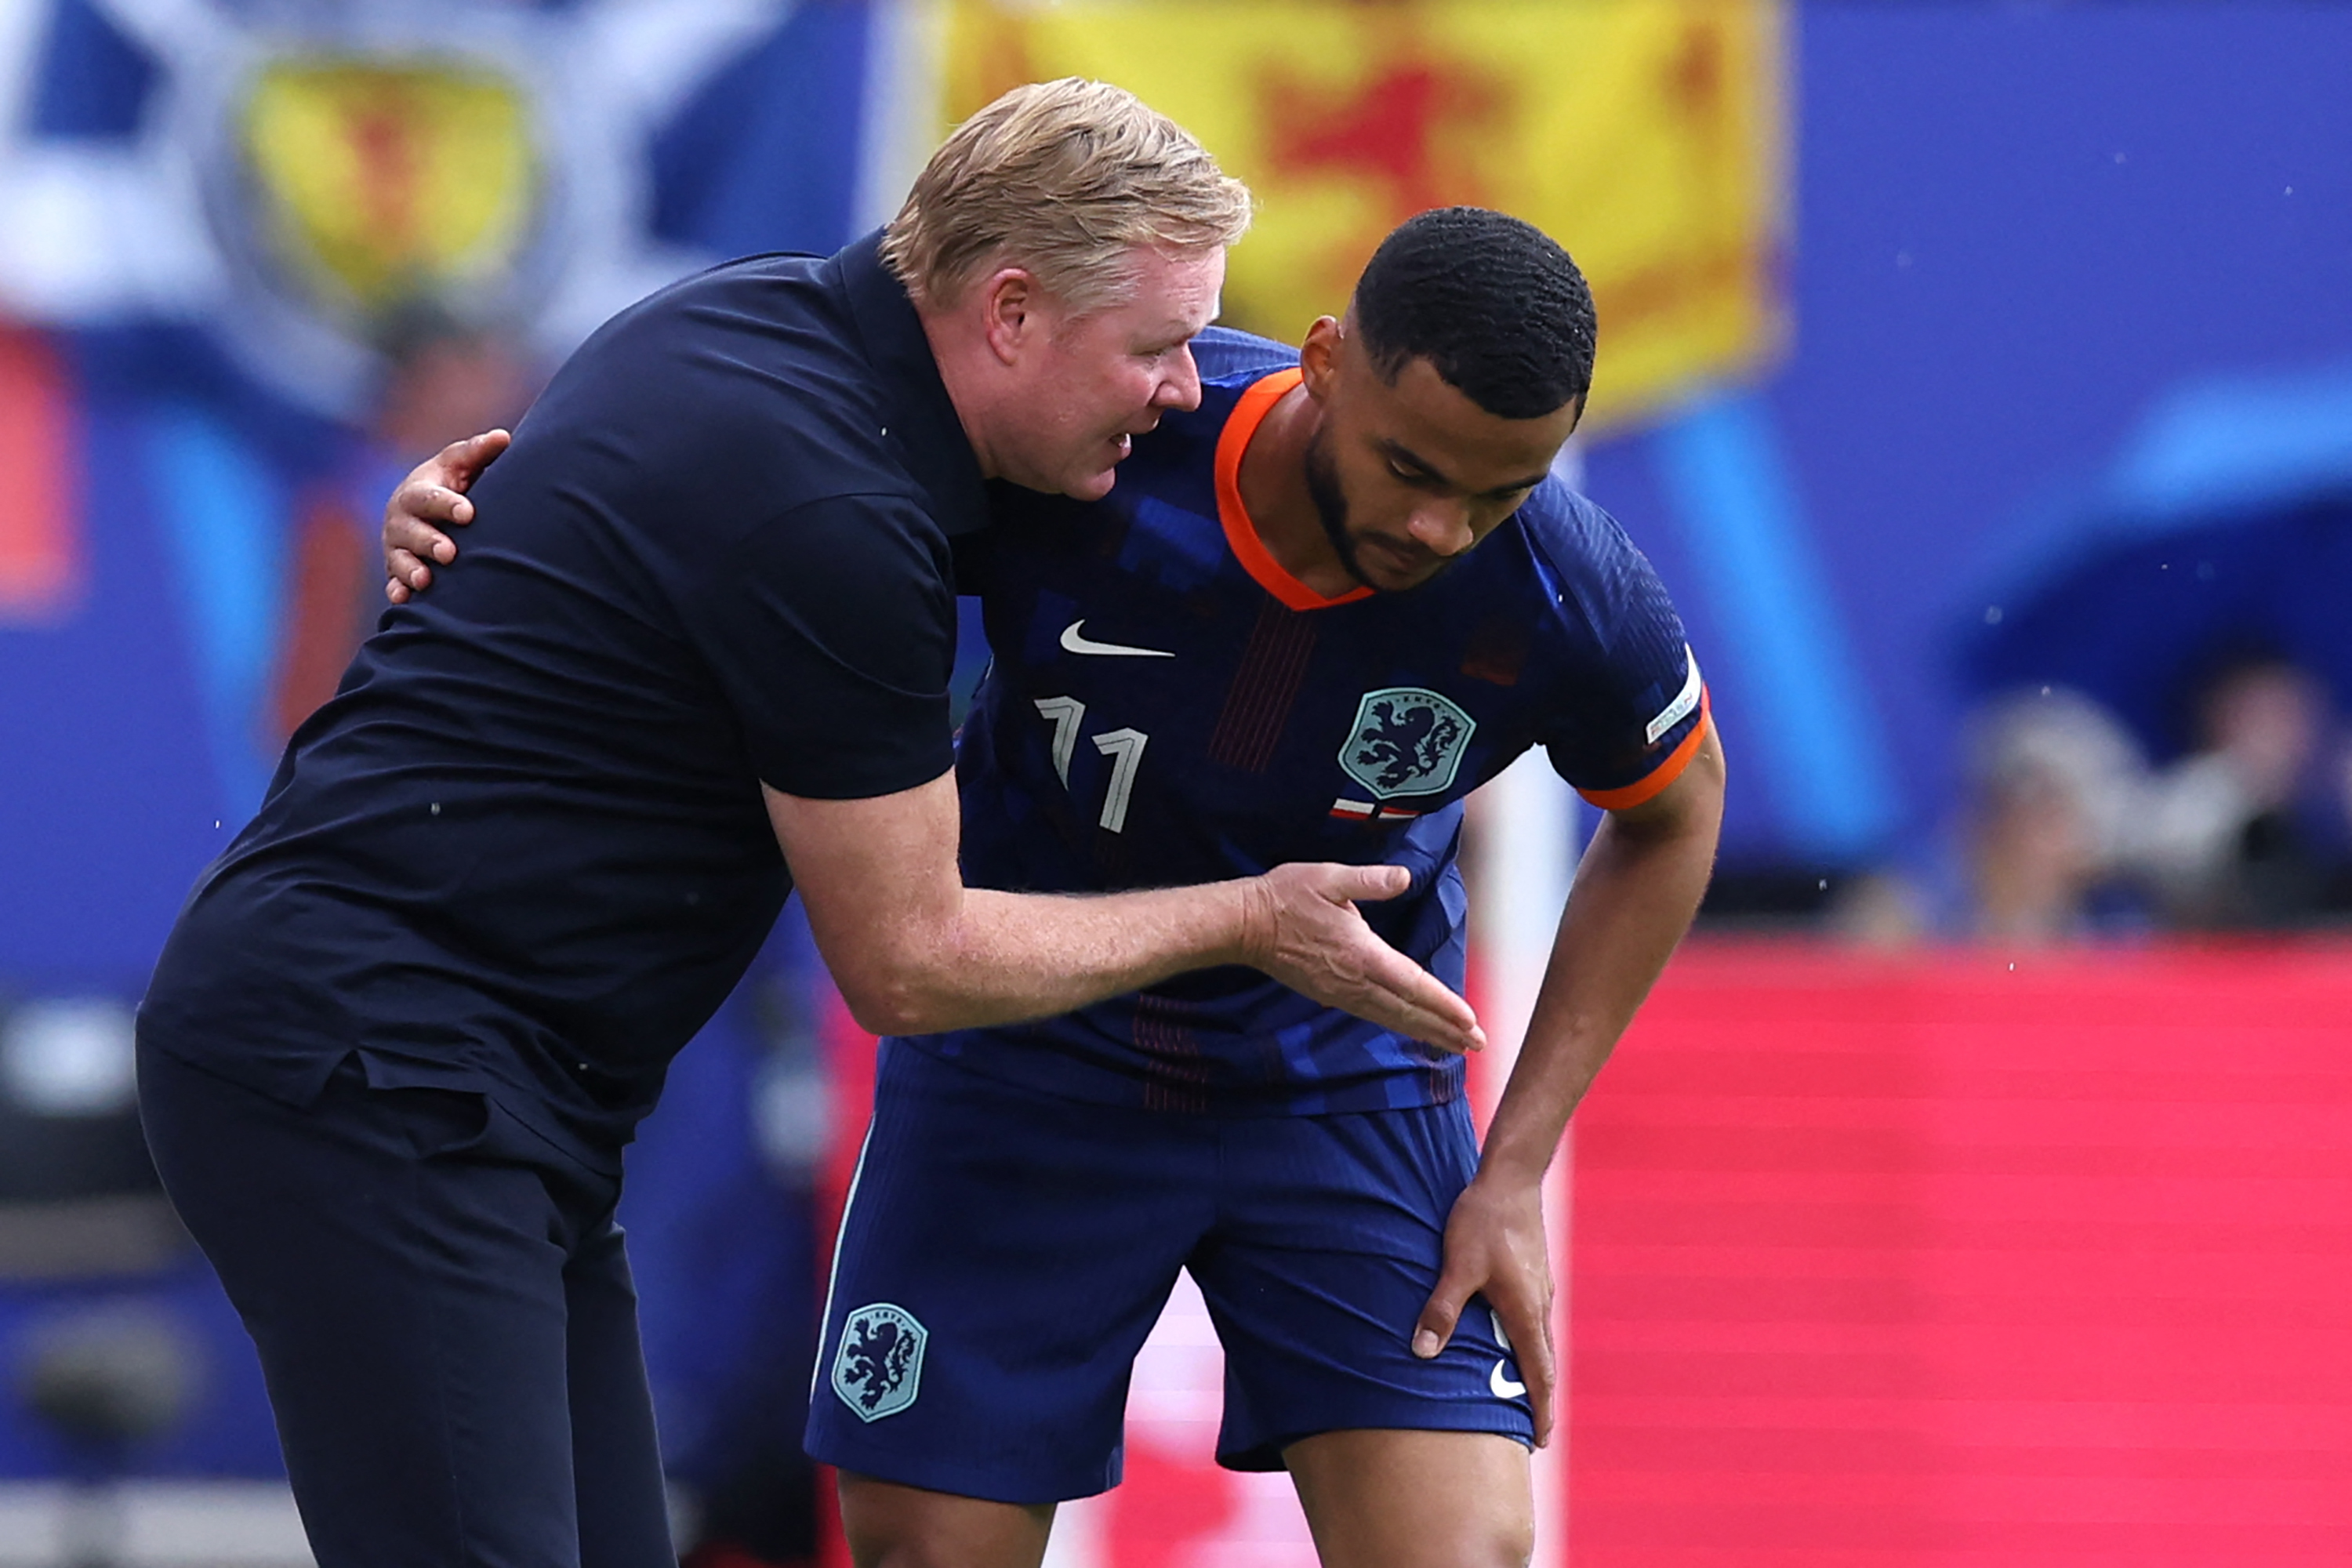 ‘Don’t know why…’ – Cody Gakpo was far from happy over what Koeman did during Netherlands win